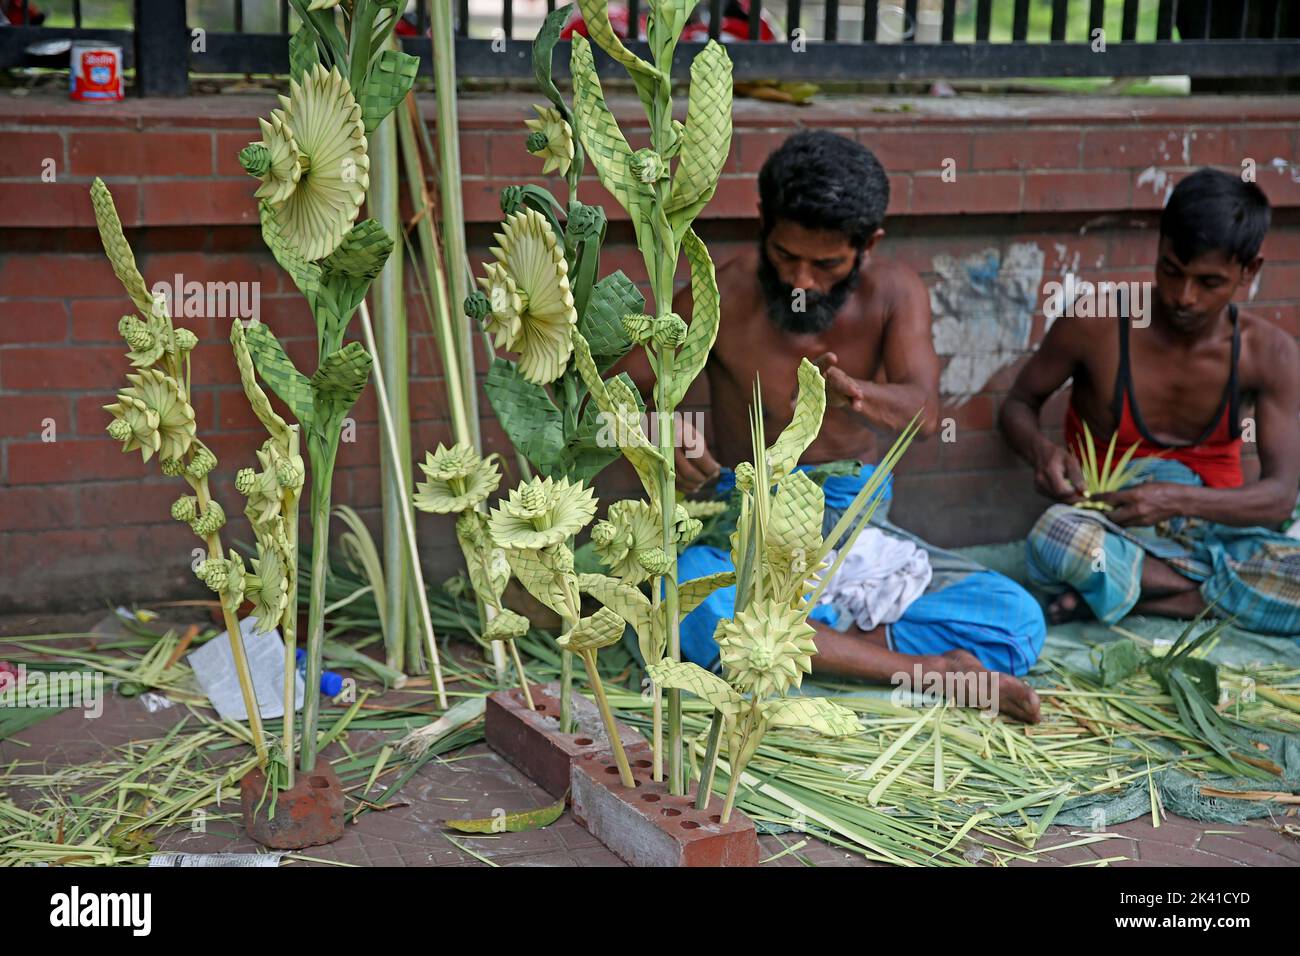 Handicraft in the form of flowers, trees and other shapes made of palm leaves. Swapan, and his helpers, Milan and Ripon, have been using this talent t Stock Photo